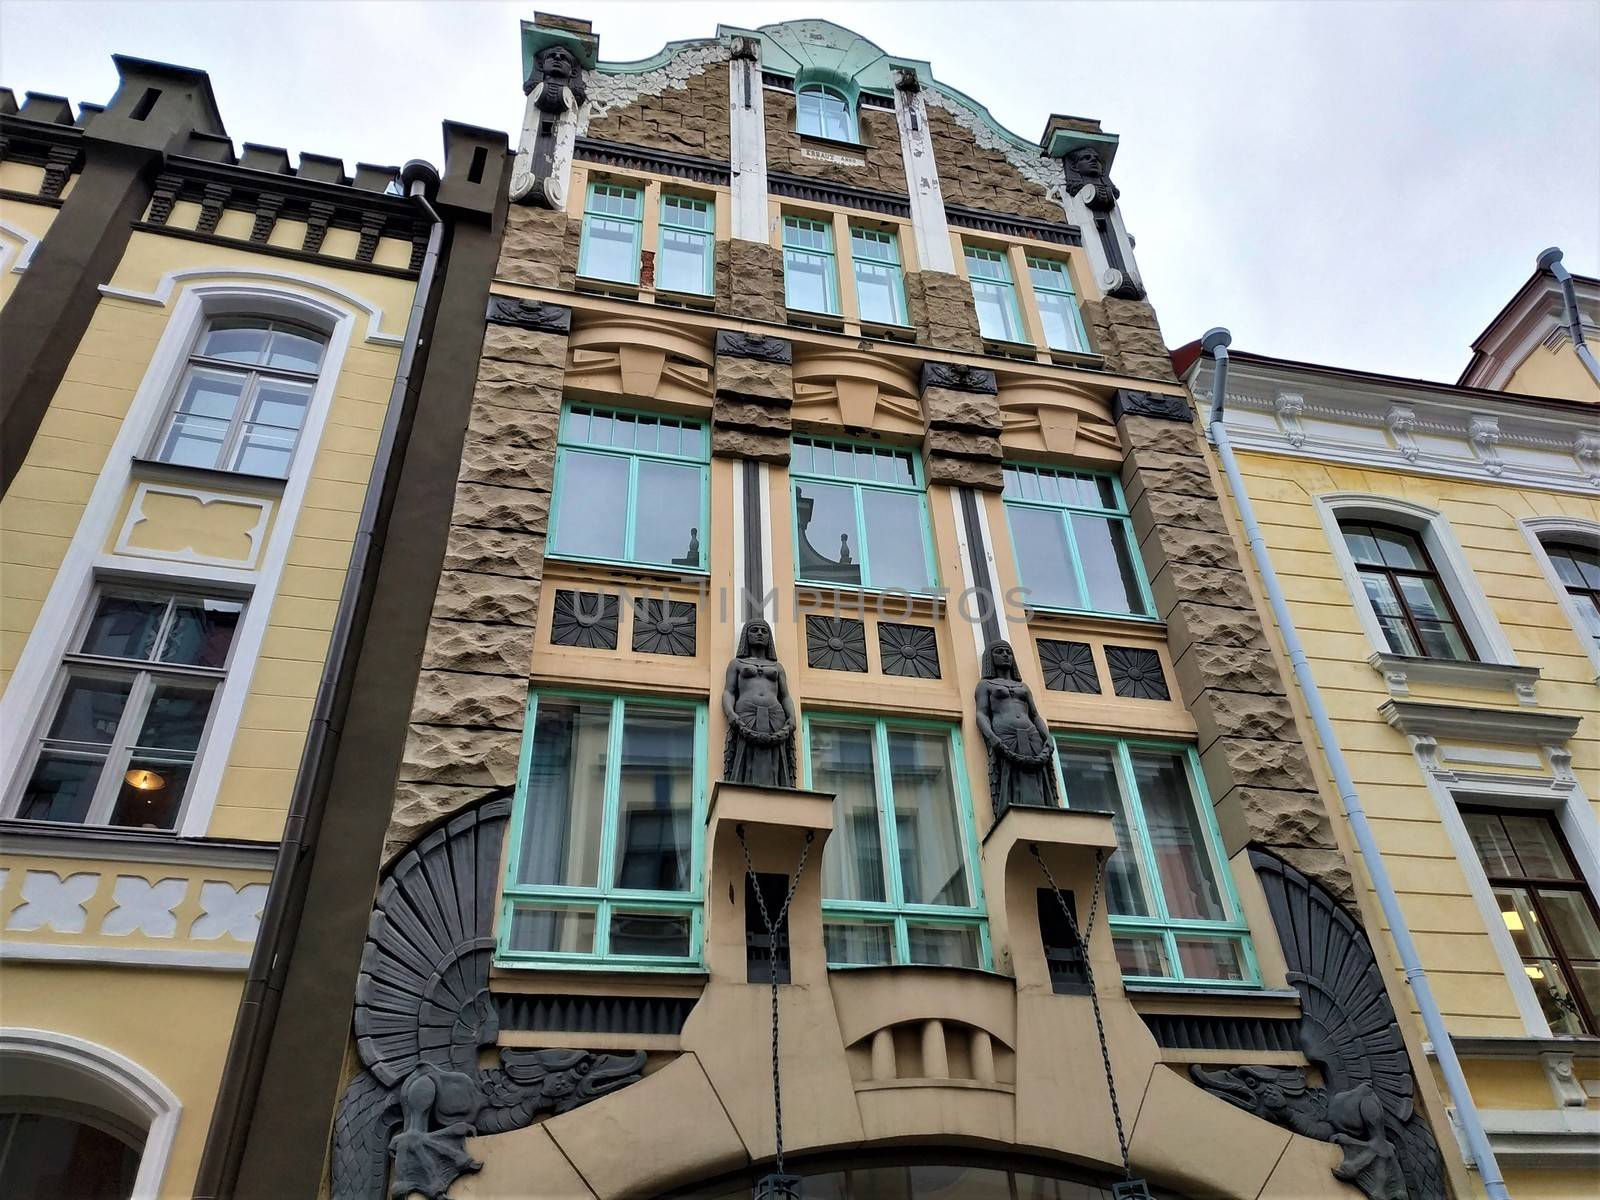 House decorated with dragons and egyptian looking ladies in Tallinn, Estonia